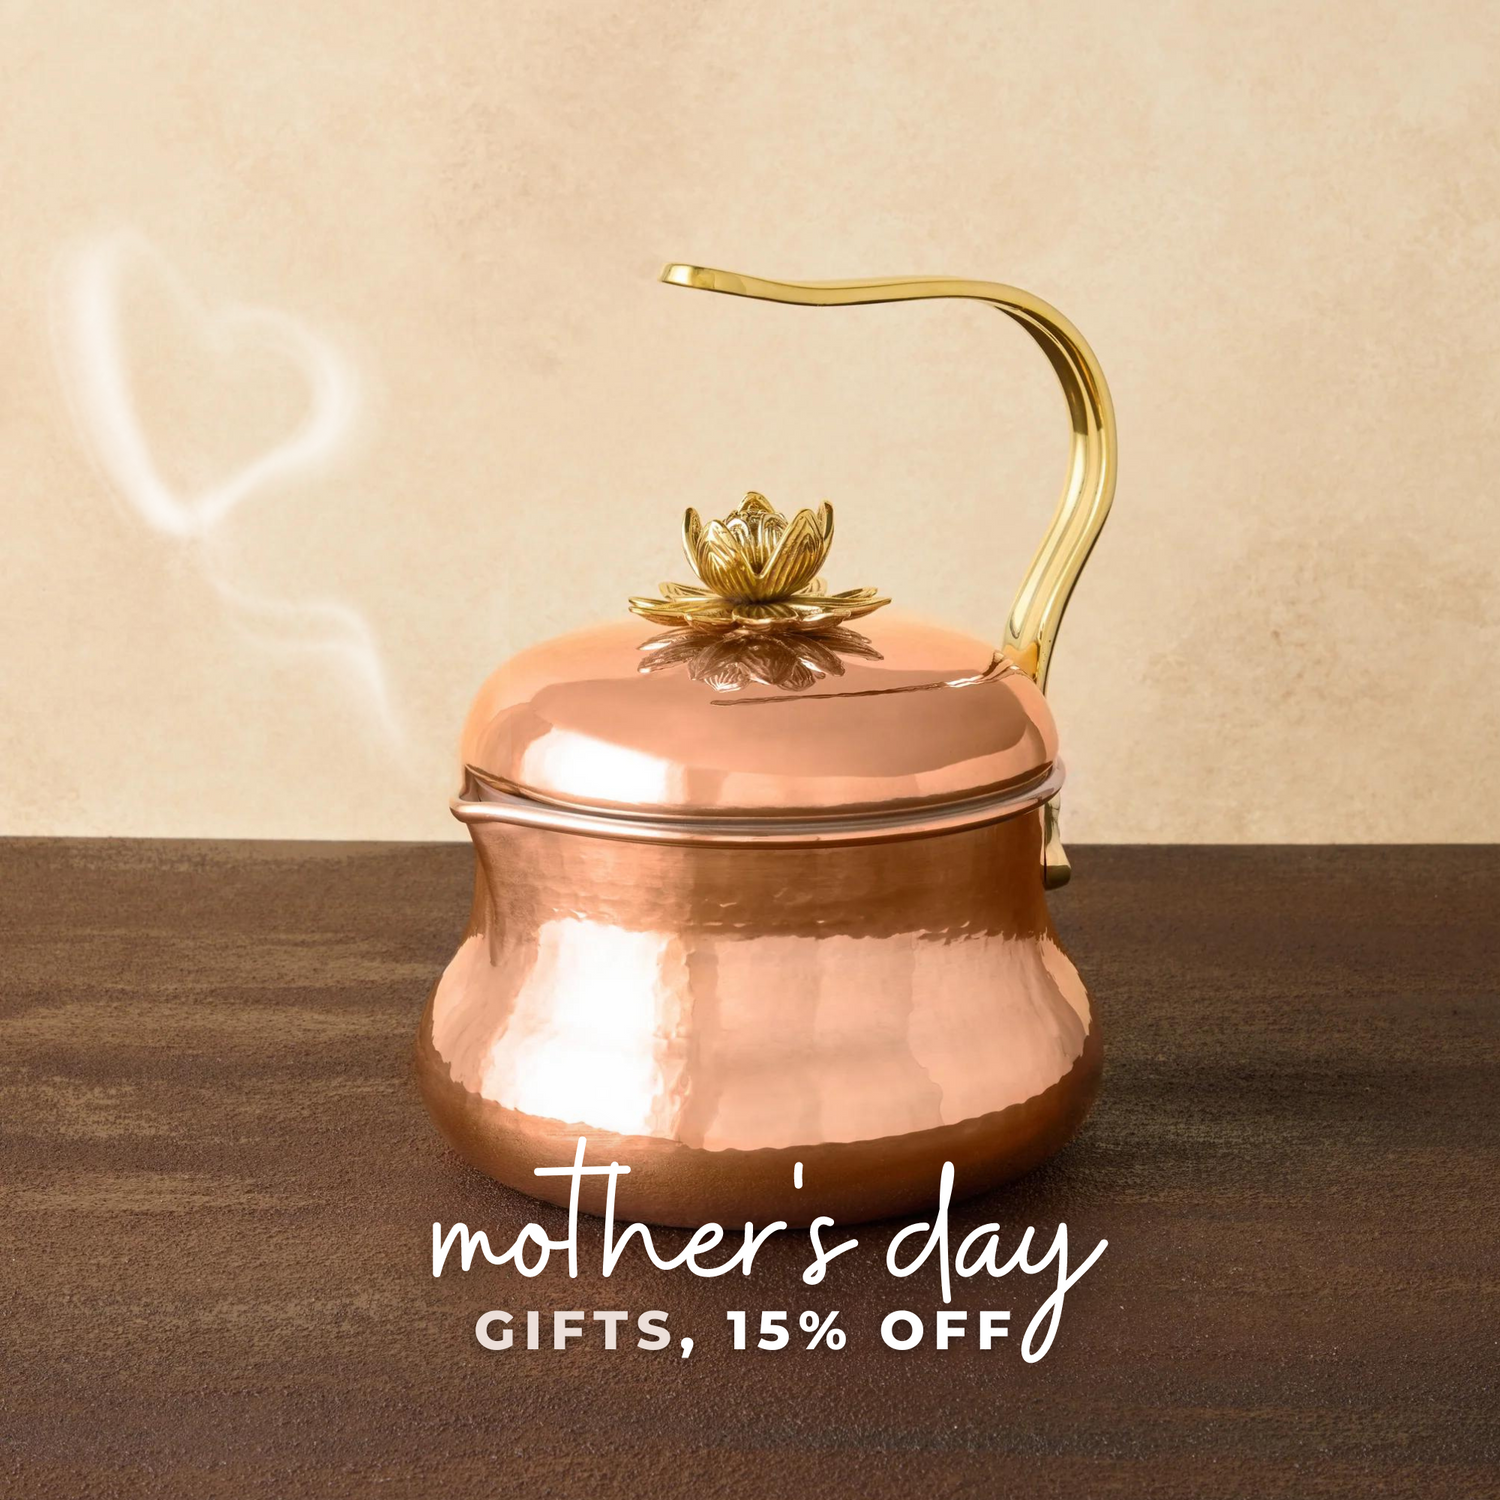 Tea Kette, Mother's day